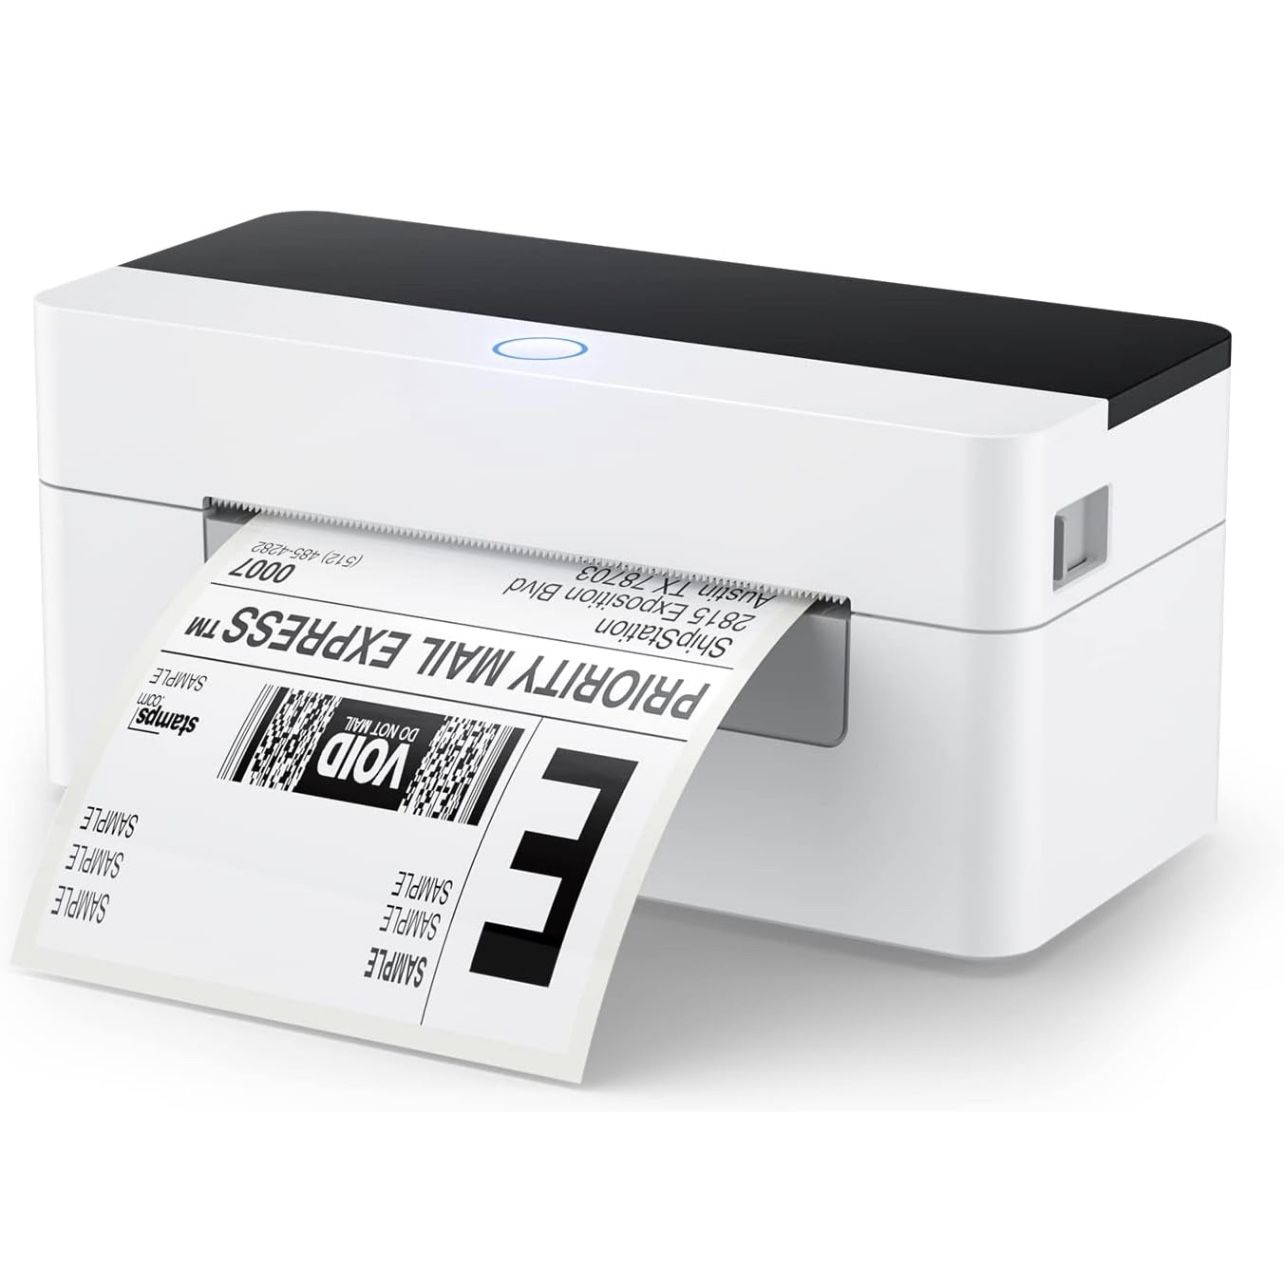 OFFNOVA Shipping Label Printer, 4x6 Label Printer for Shipping Packages